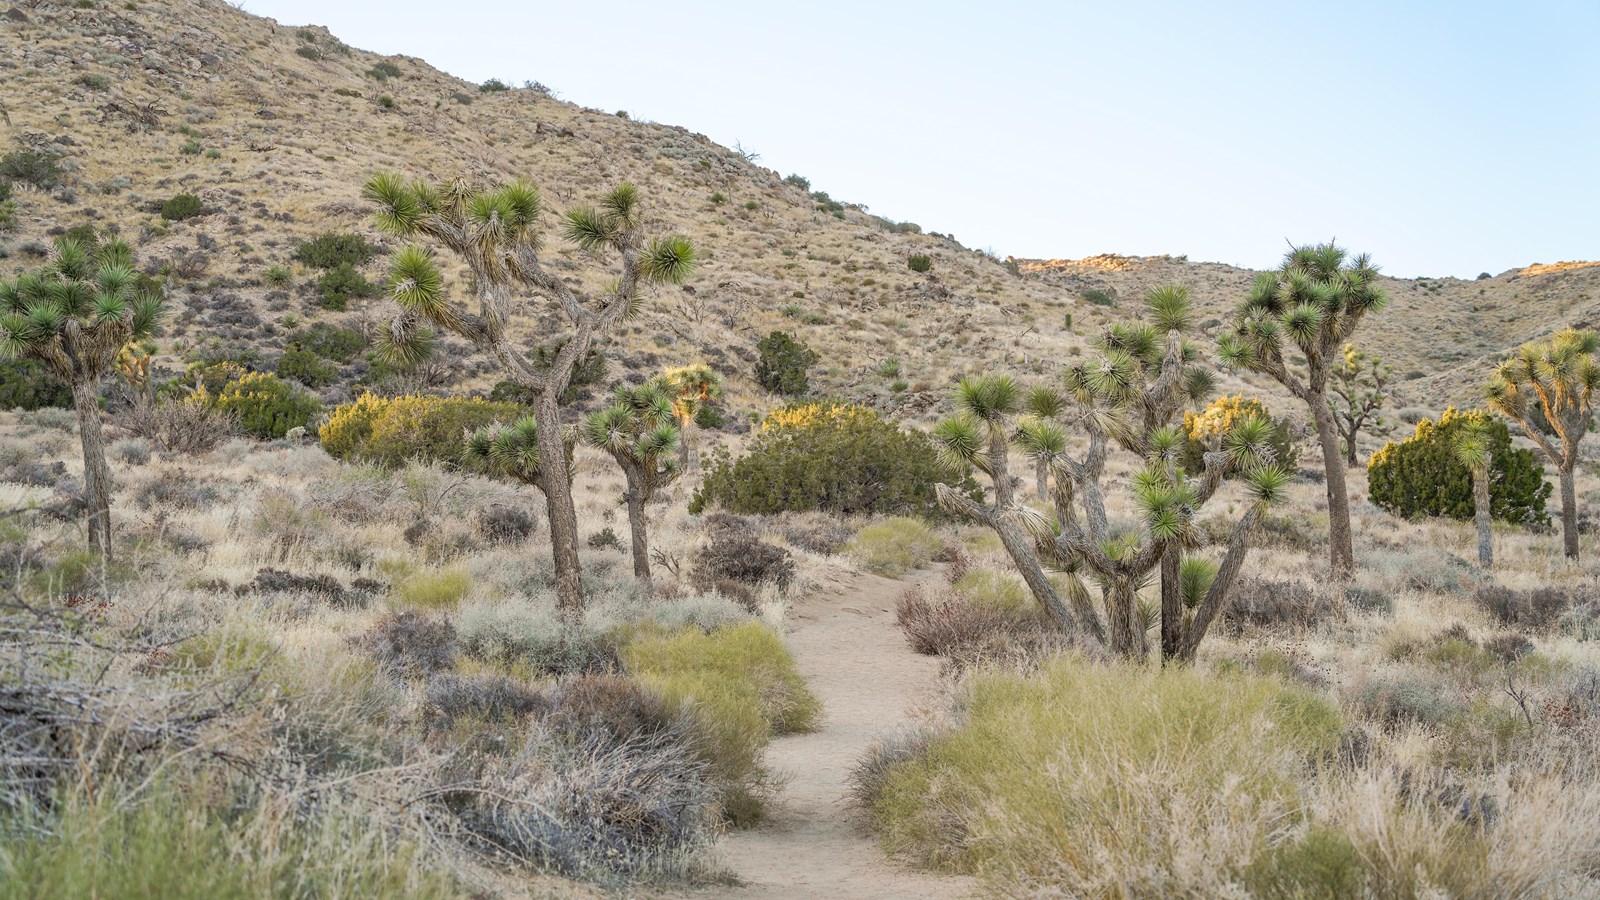 A group of Joshua trees stand near a dirt path surrounded by smaller shurbs and grasses.